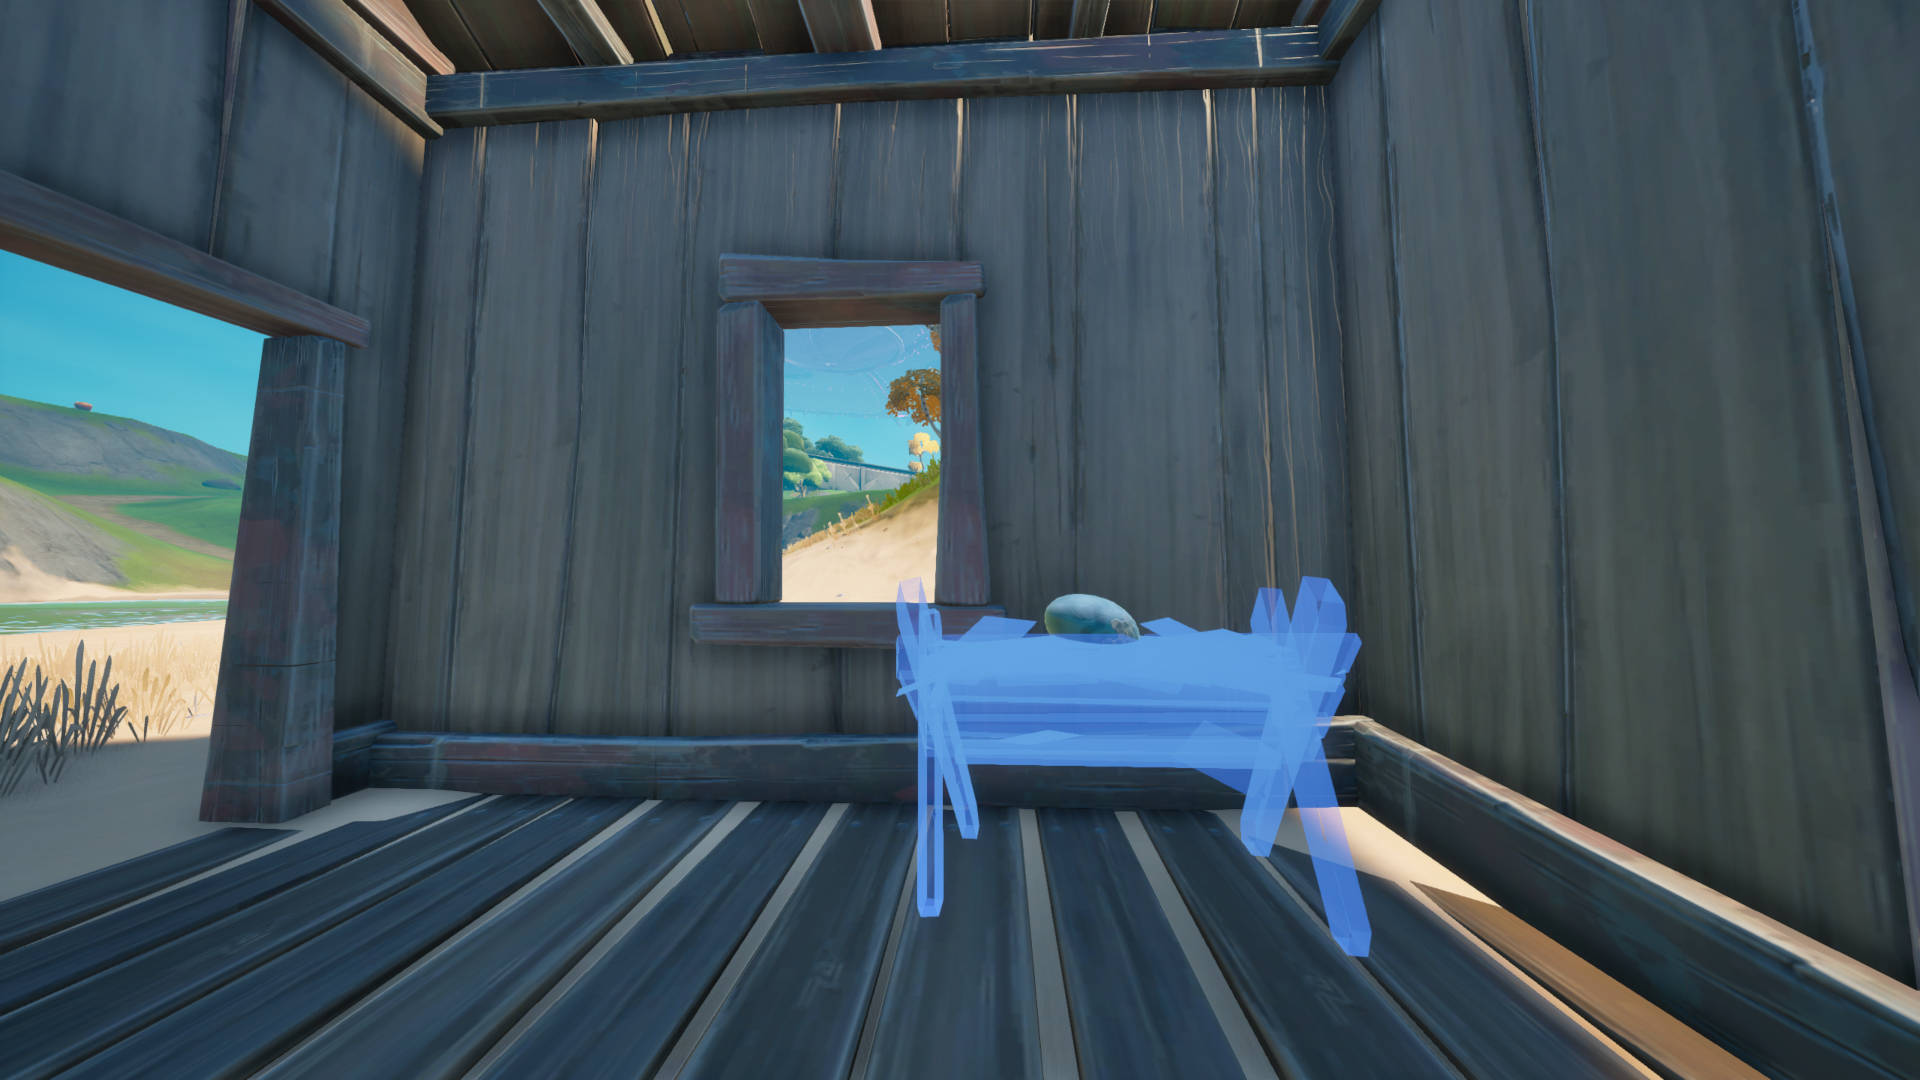 Construct a wooden hatchery in Fortnite